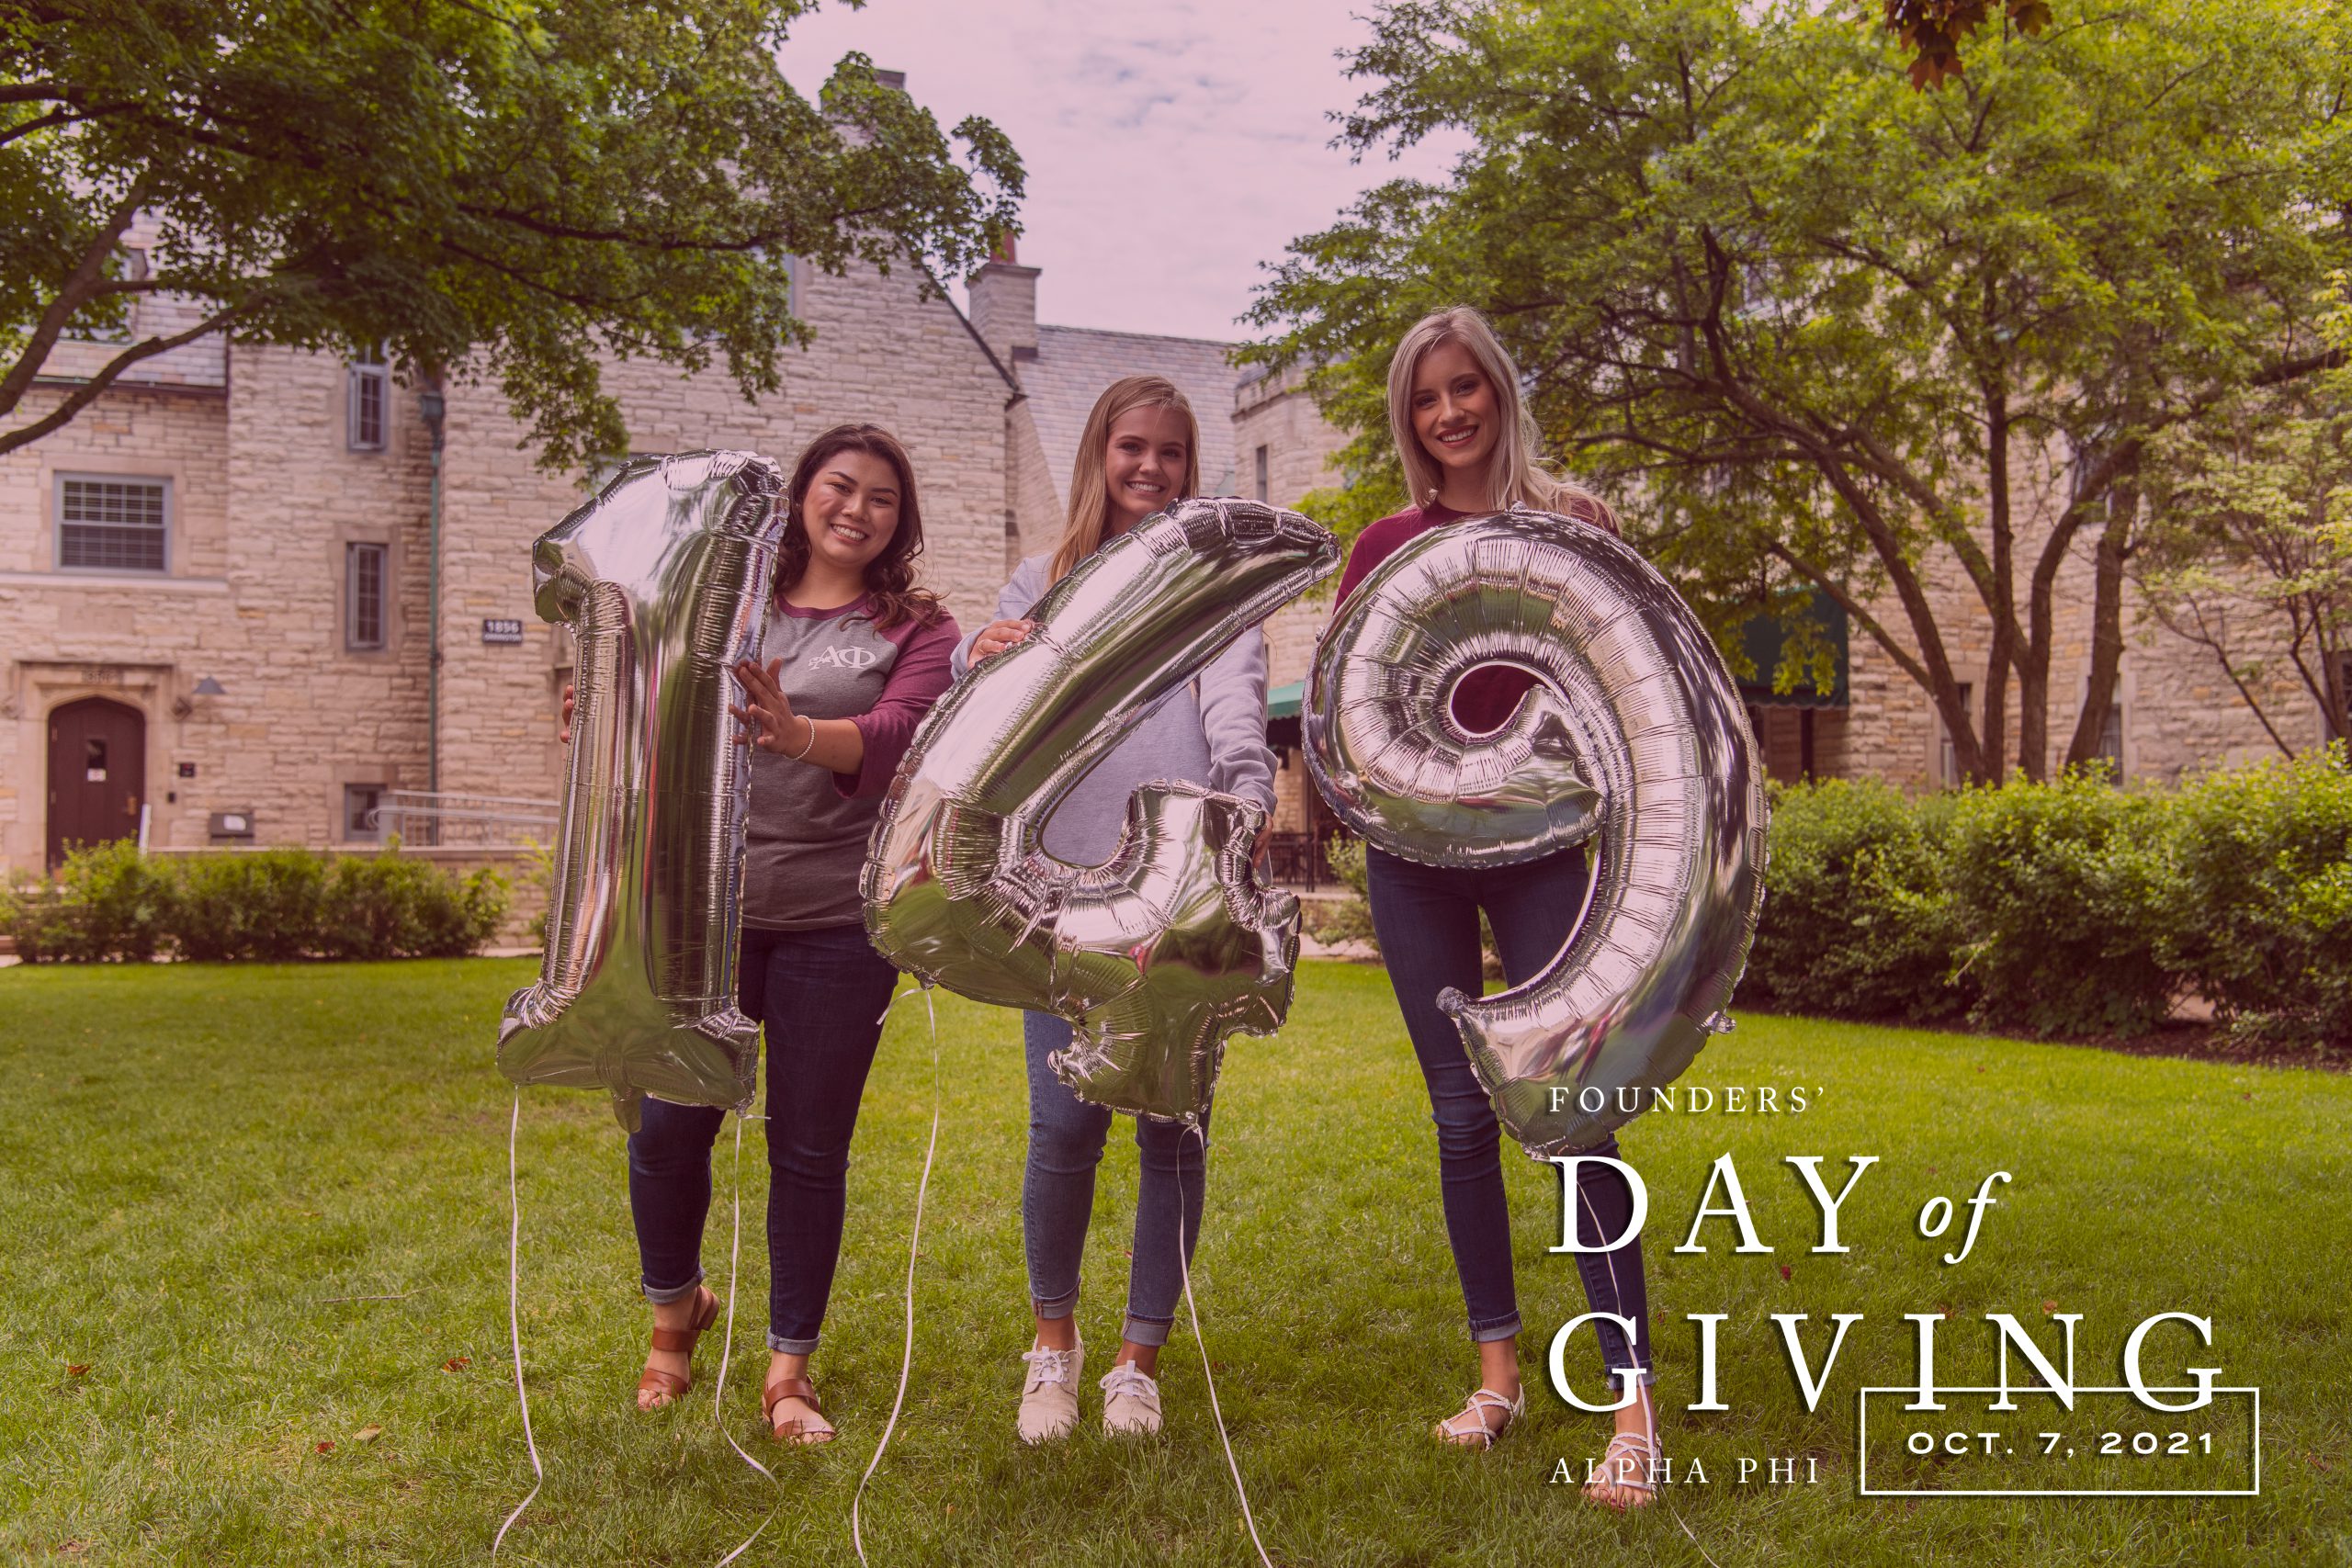 A logo displaying Founders' Day of Giving October 7, 2021 superimposed on an image of three smiling women holding silver foil balloons displaying the number 149.